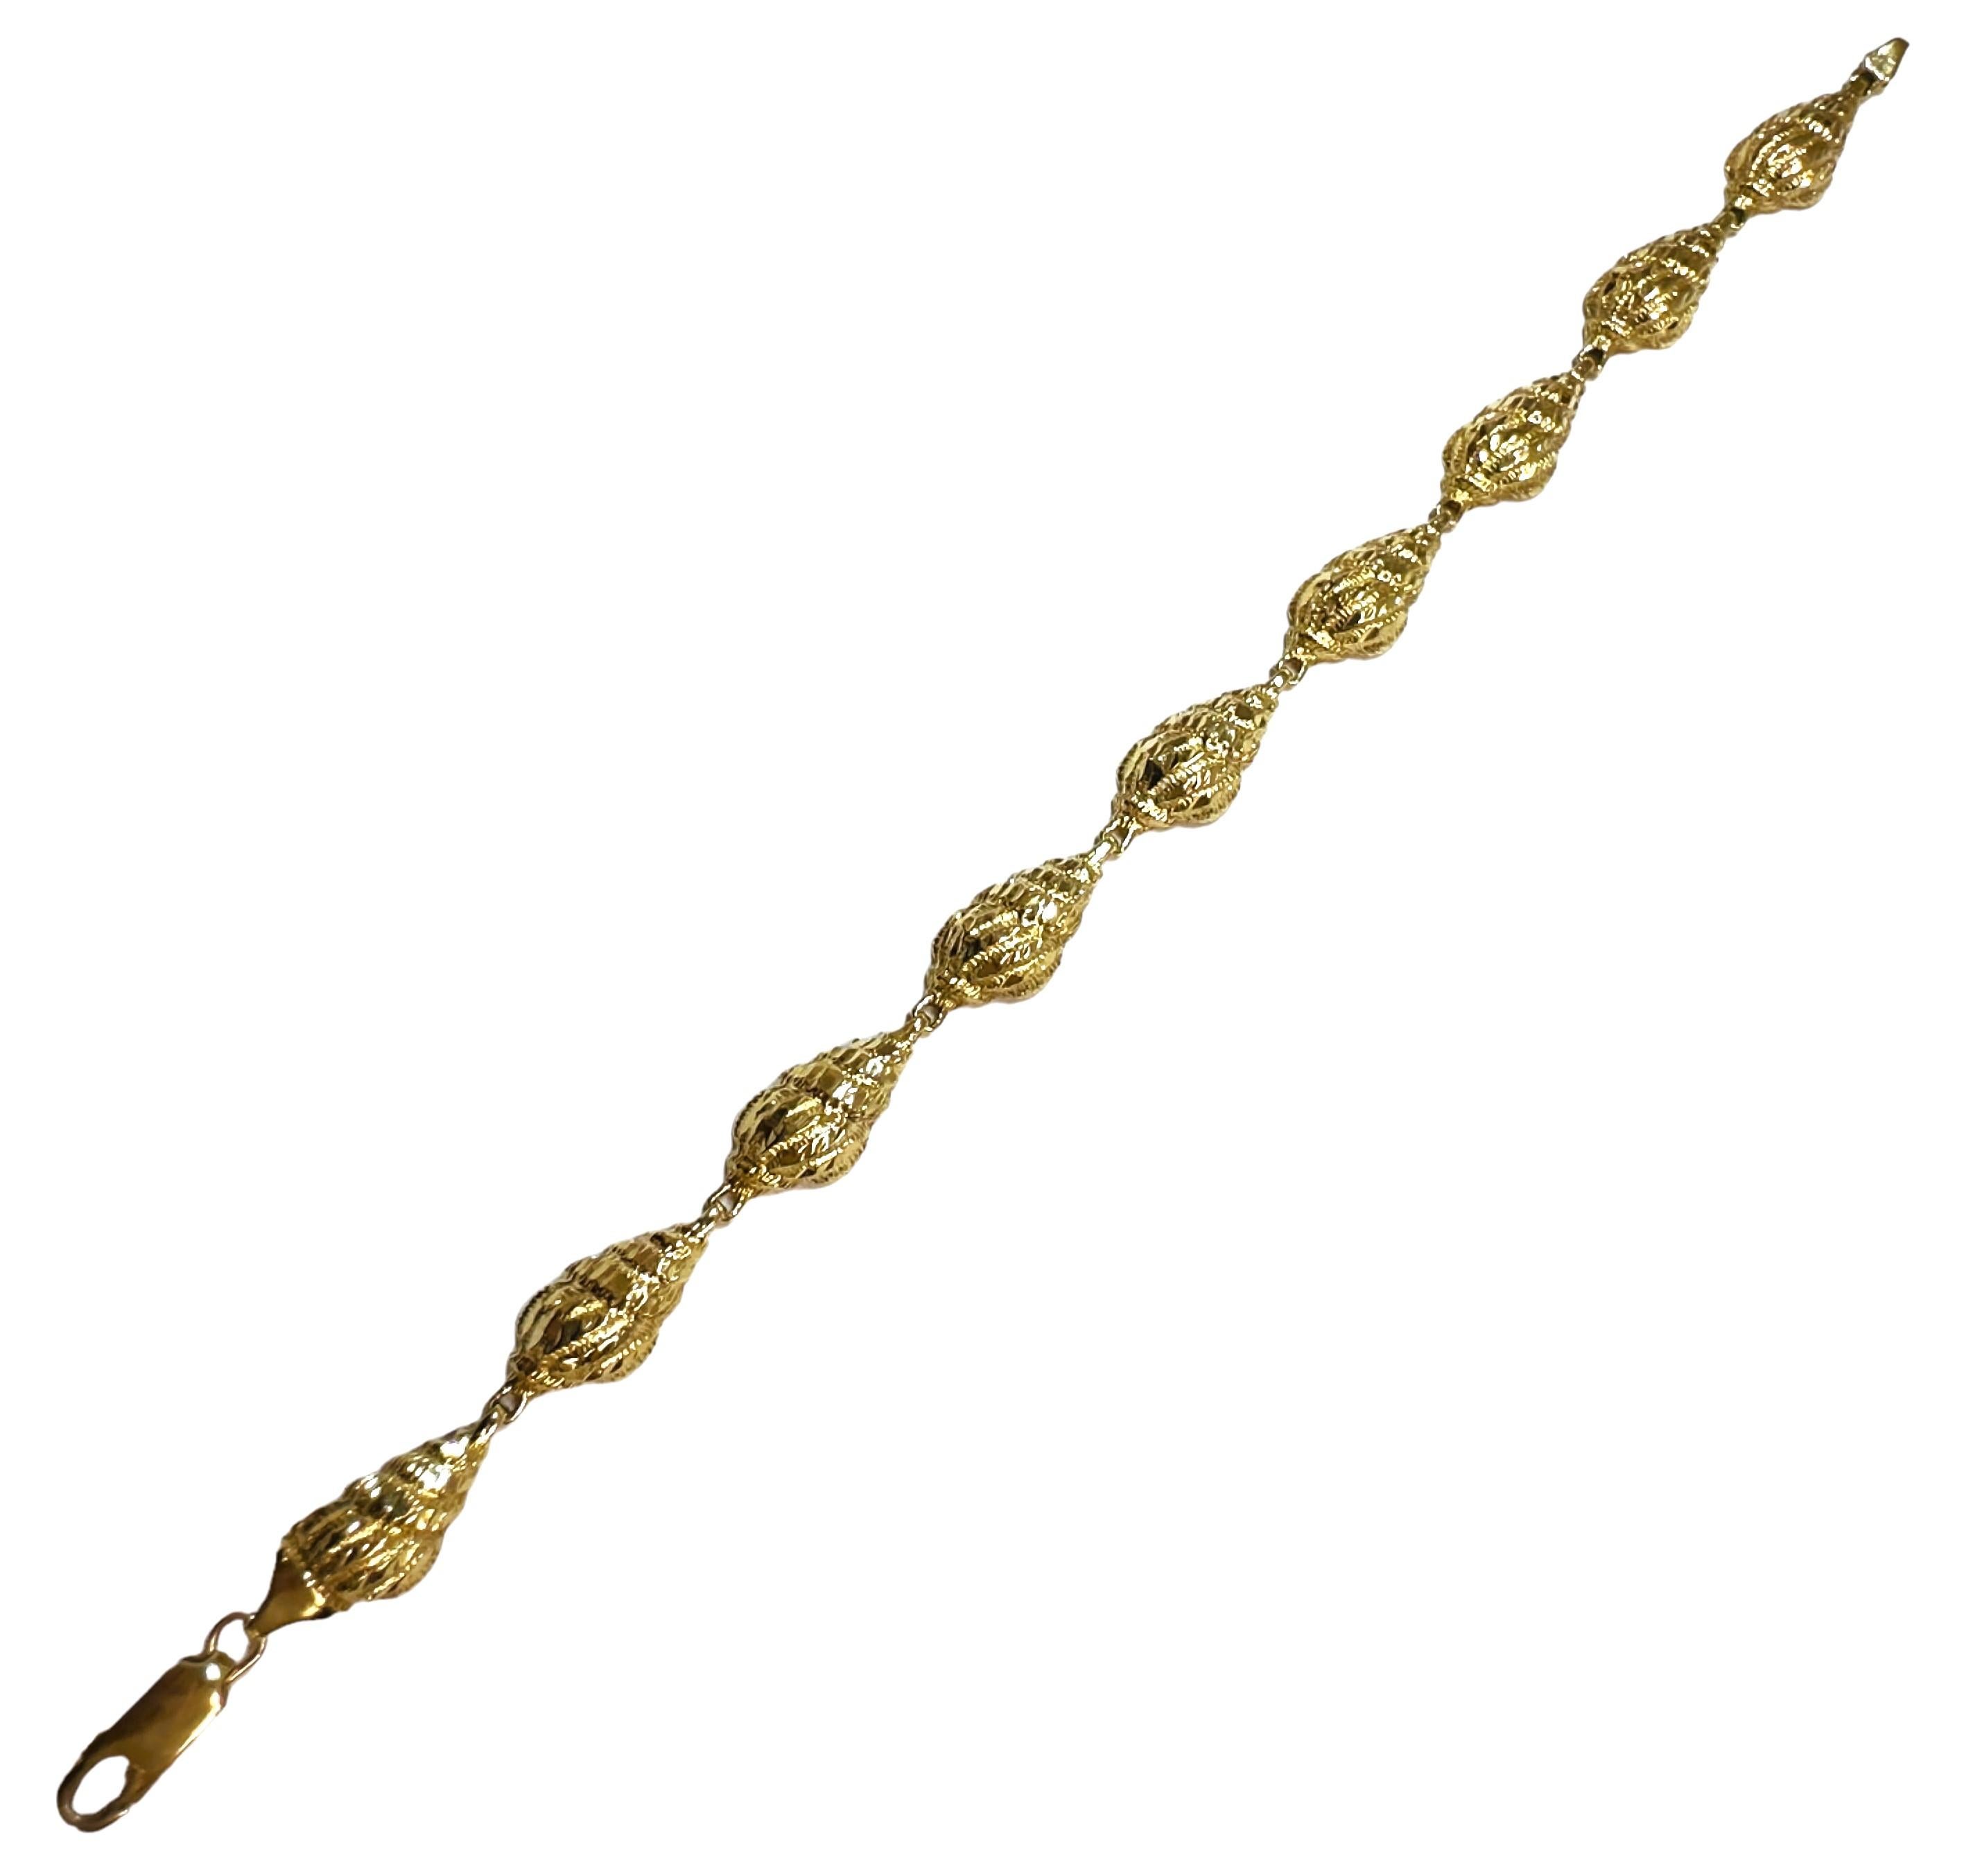 Art Nouveau 14k Yellow Gold Sea Shell  Bracelet - 7 inches - Stamped For Sale